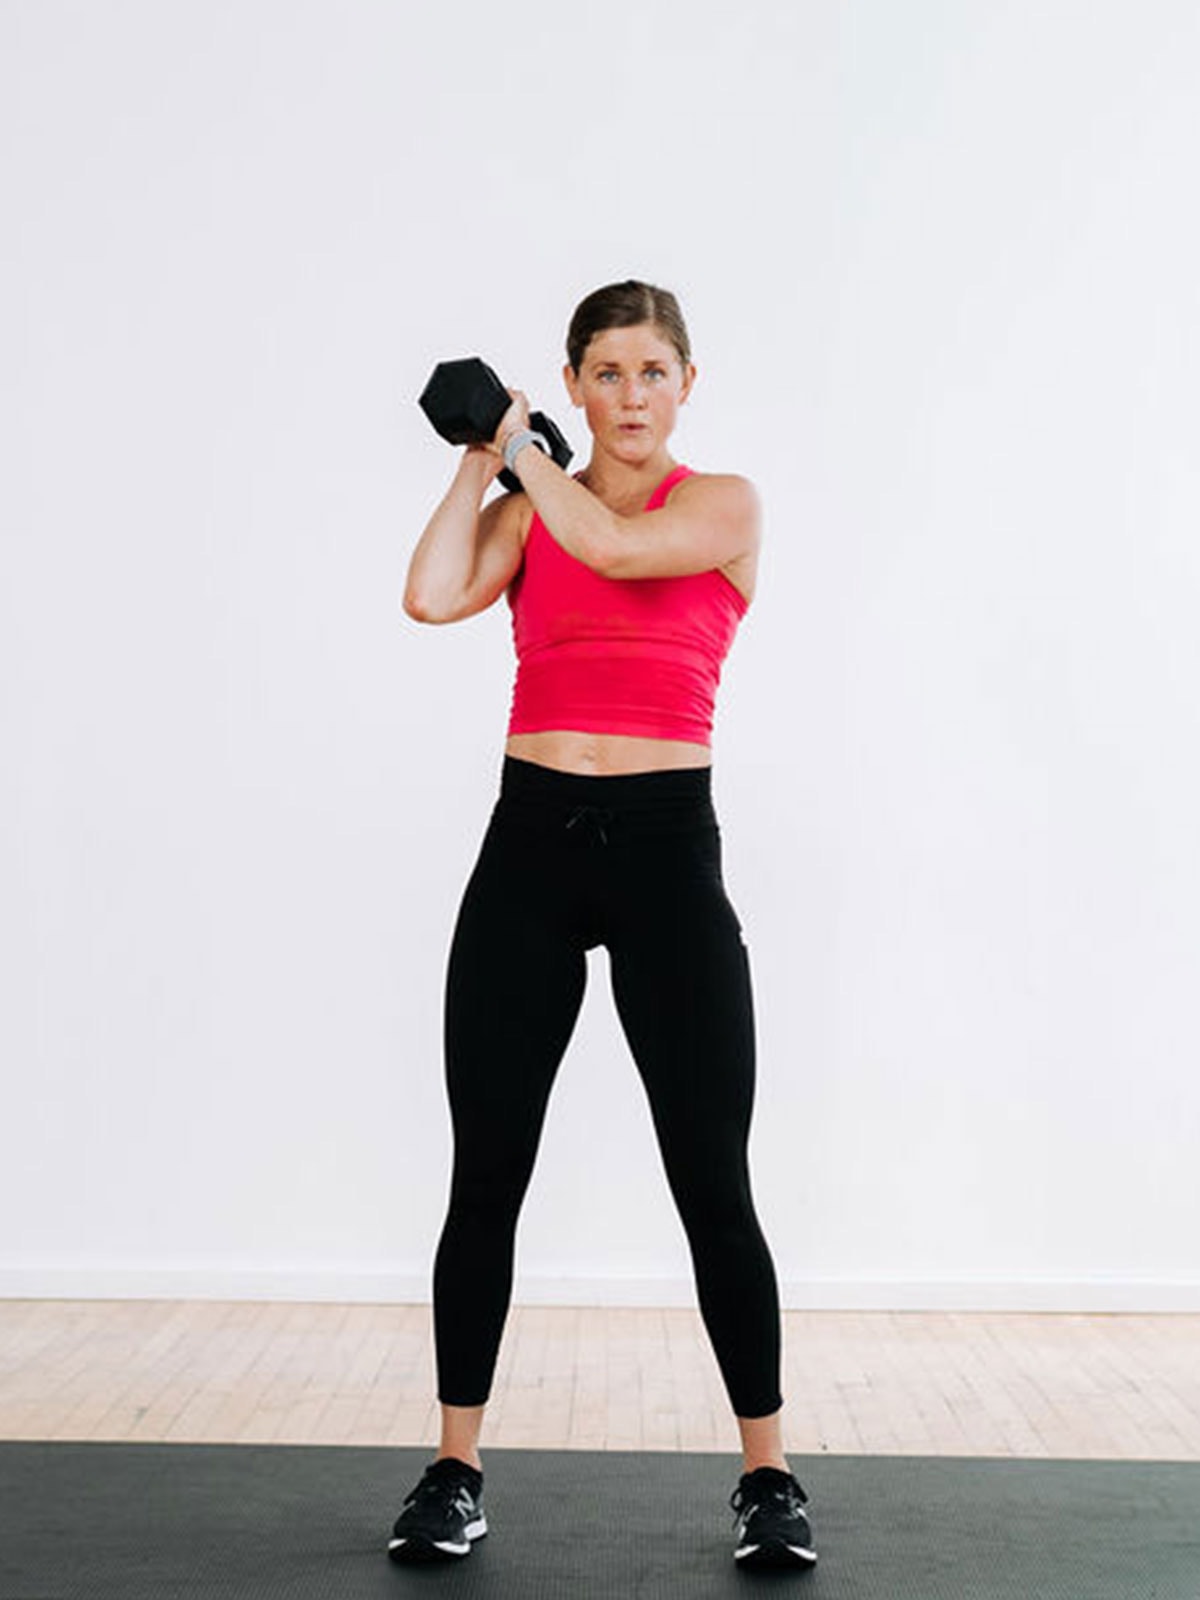 https://www.nourishmovelove.com/wp-content/uploads/2021/07/Strong-Abs-Arms-Workout-for-Women_Google-Story.jpeg